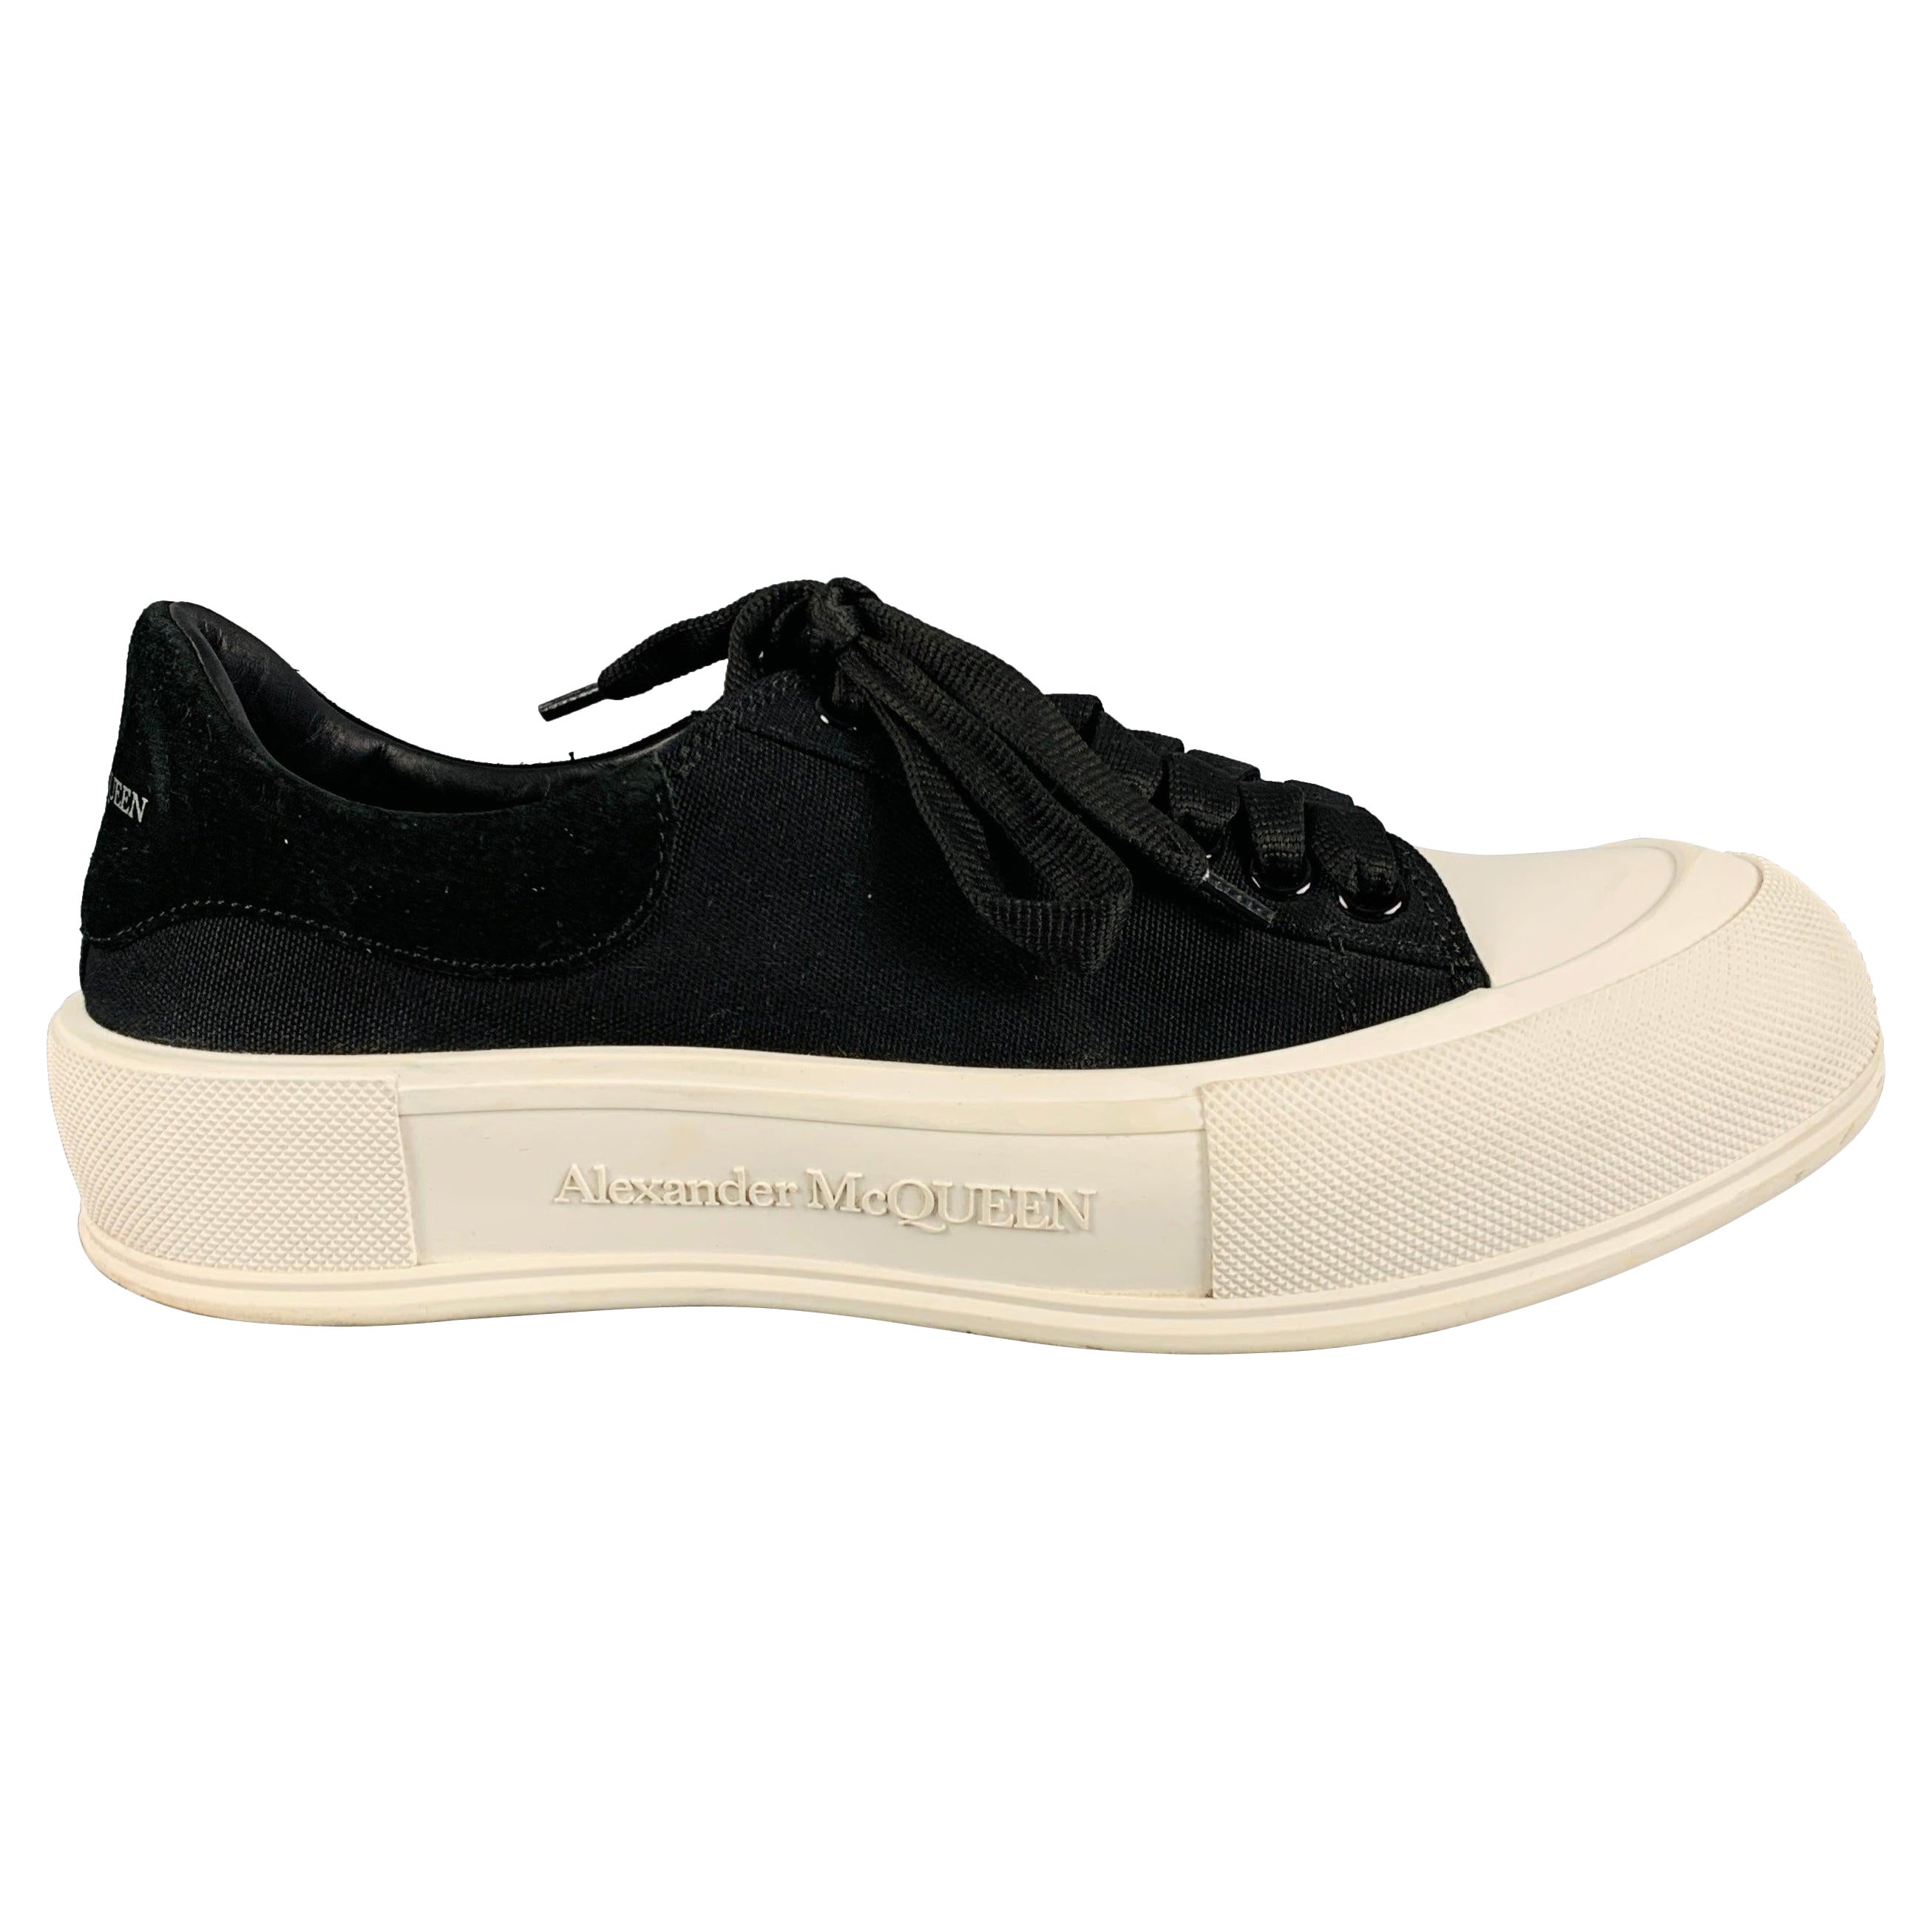 ALEXANDER MCQUEEN Size 10 Black White Two Toned Canvas Lace-Up Sneakers For Sale